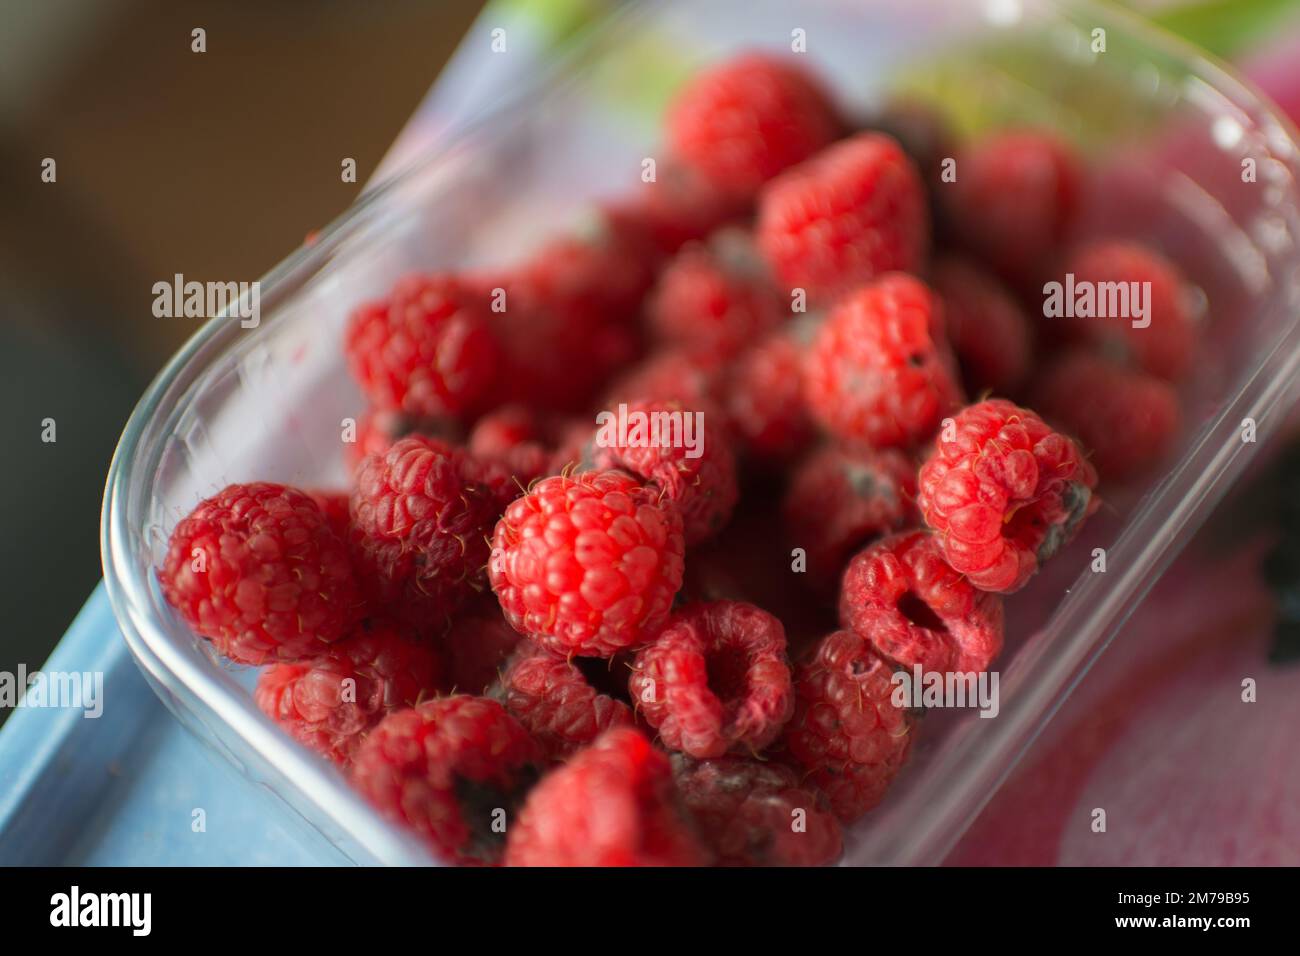 Close up of a plastic recipient with raspberries in bad condition. Bright red color Stock Photo